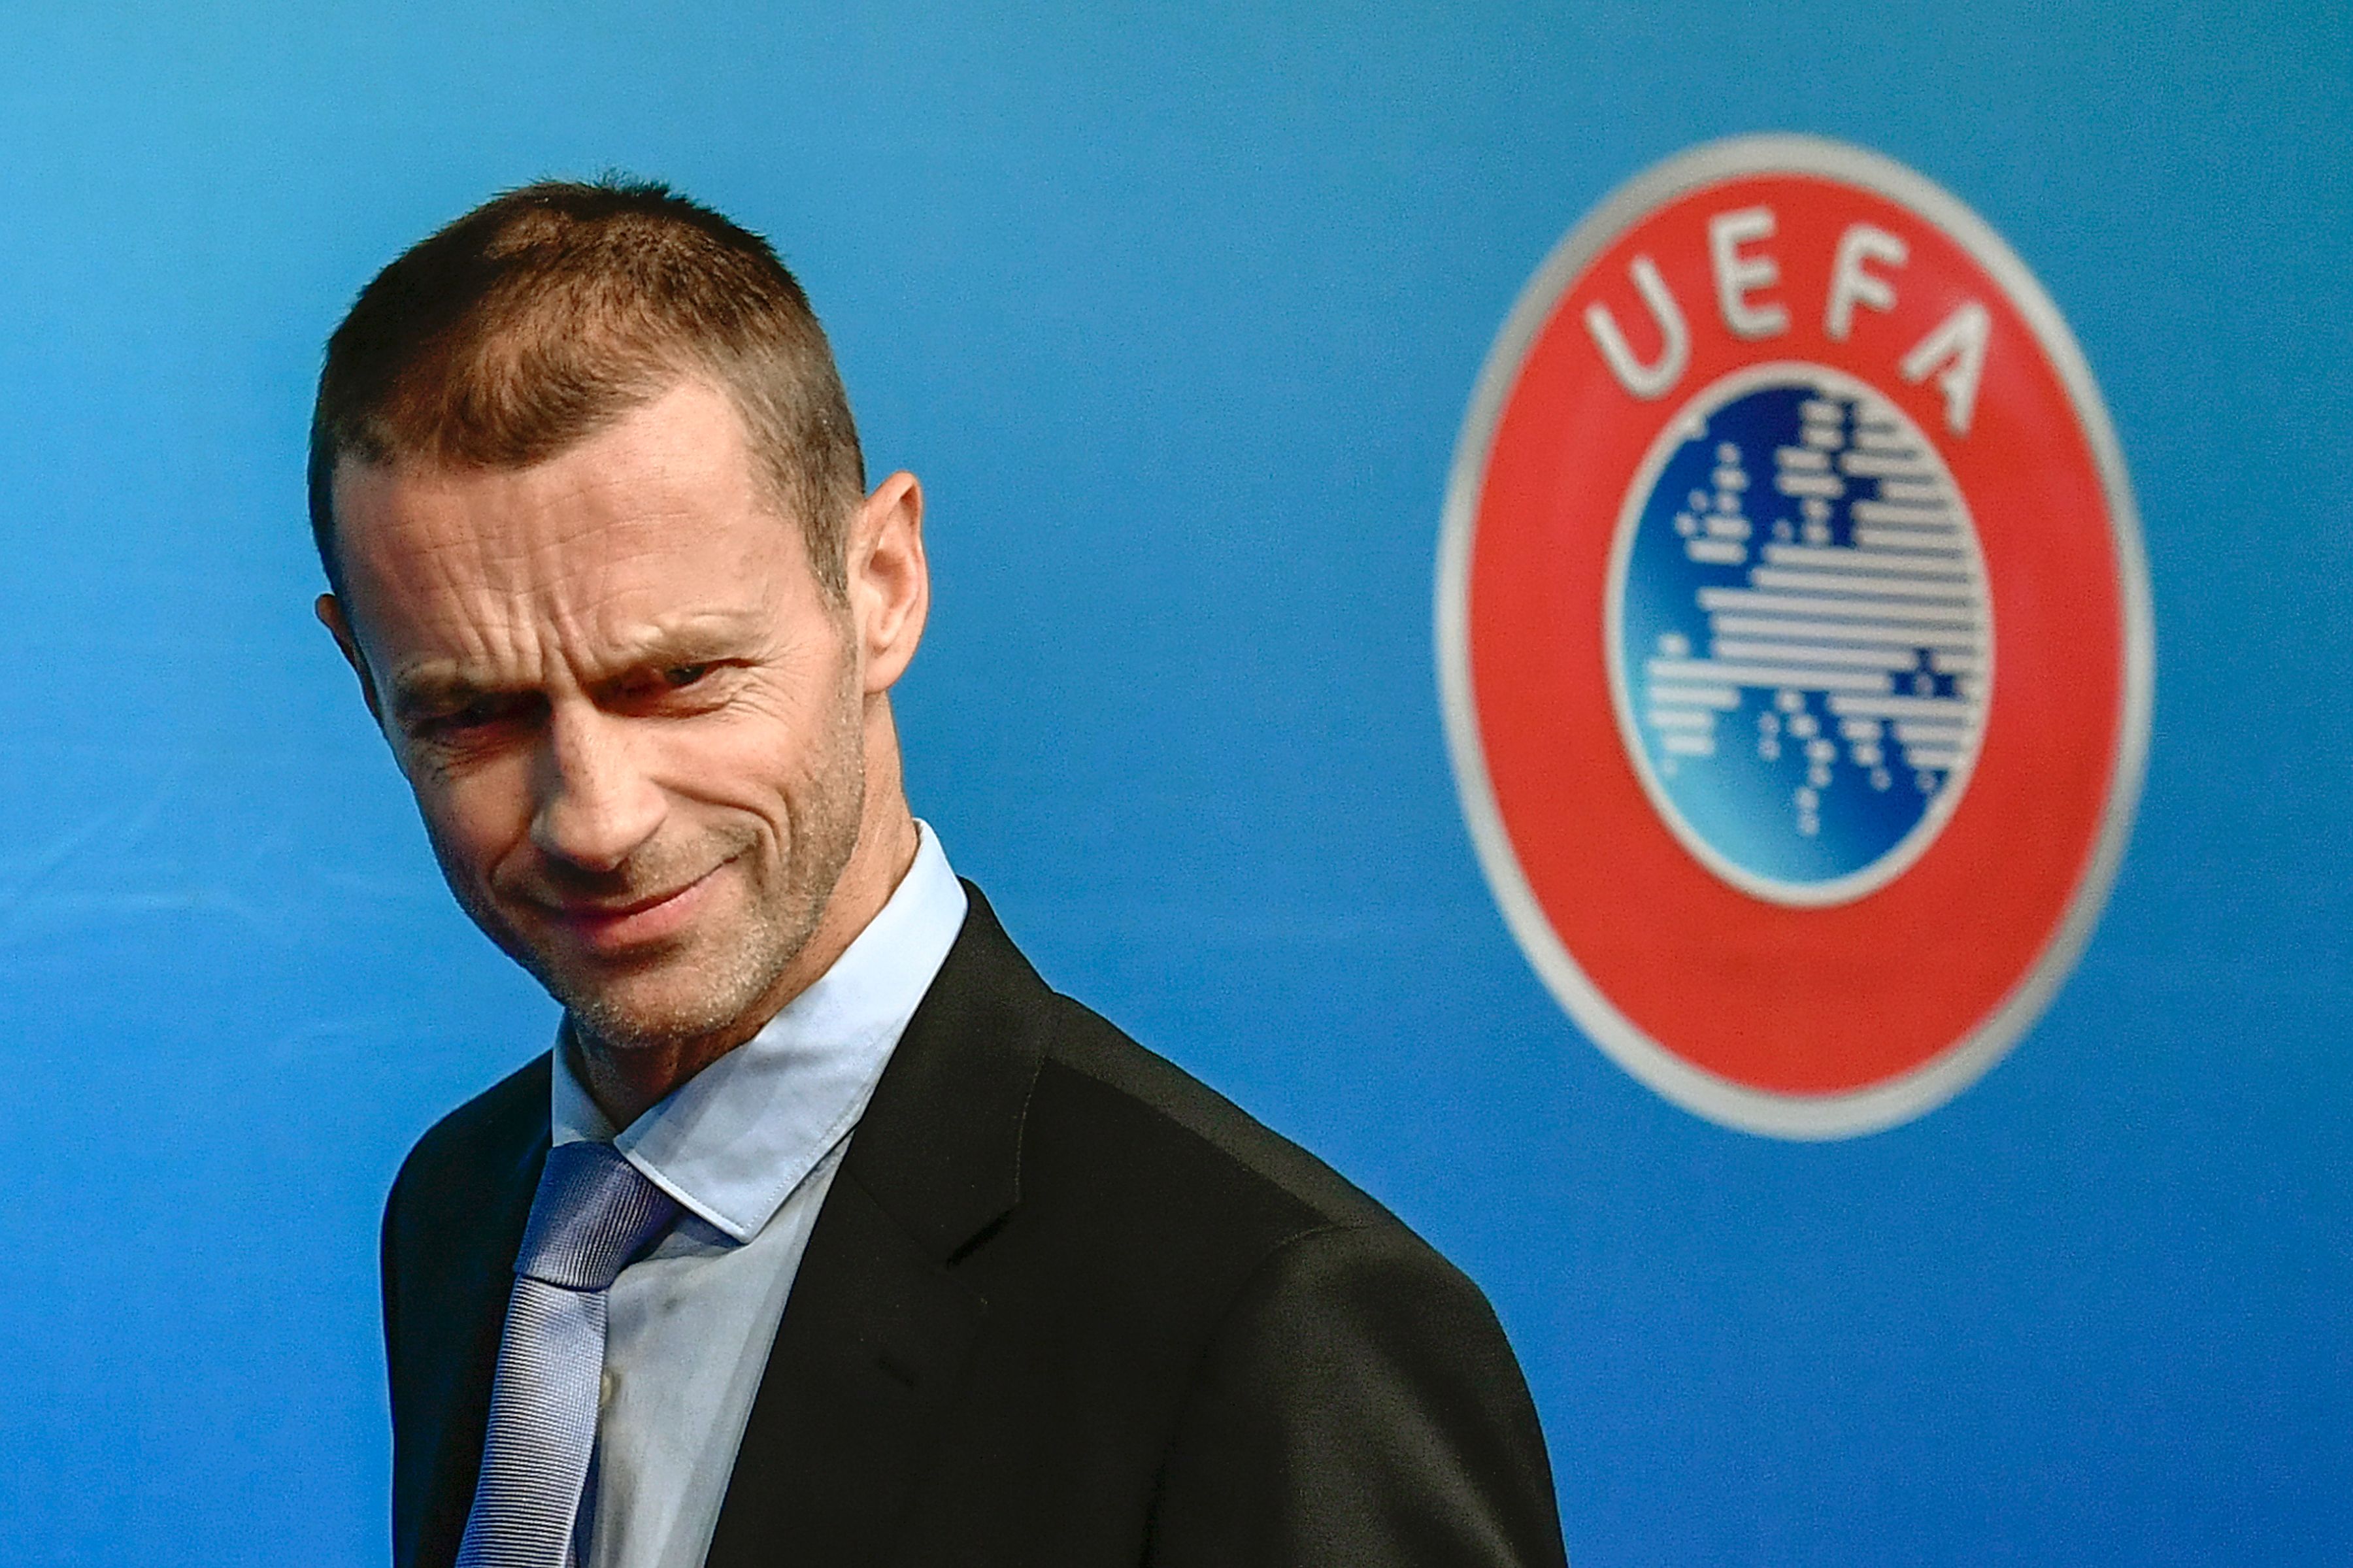 UEFA President Aleksander Ceferin arrives at a press conference closing an executive committee meeting at the headquarters of the European football's governing body on December 9, 2016 in Nyon. / AFP / FABRICE COFFRINI        (Photo credit should read FABRICE COFFRINI/AFP/Getty Images)